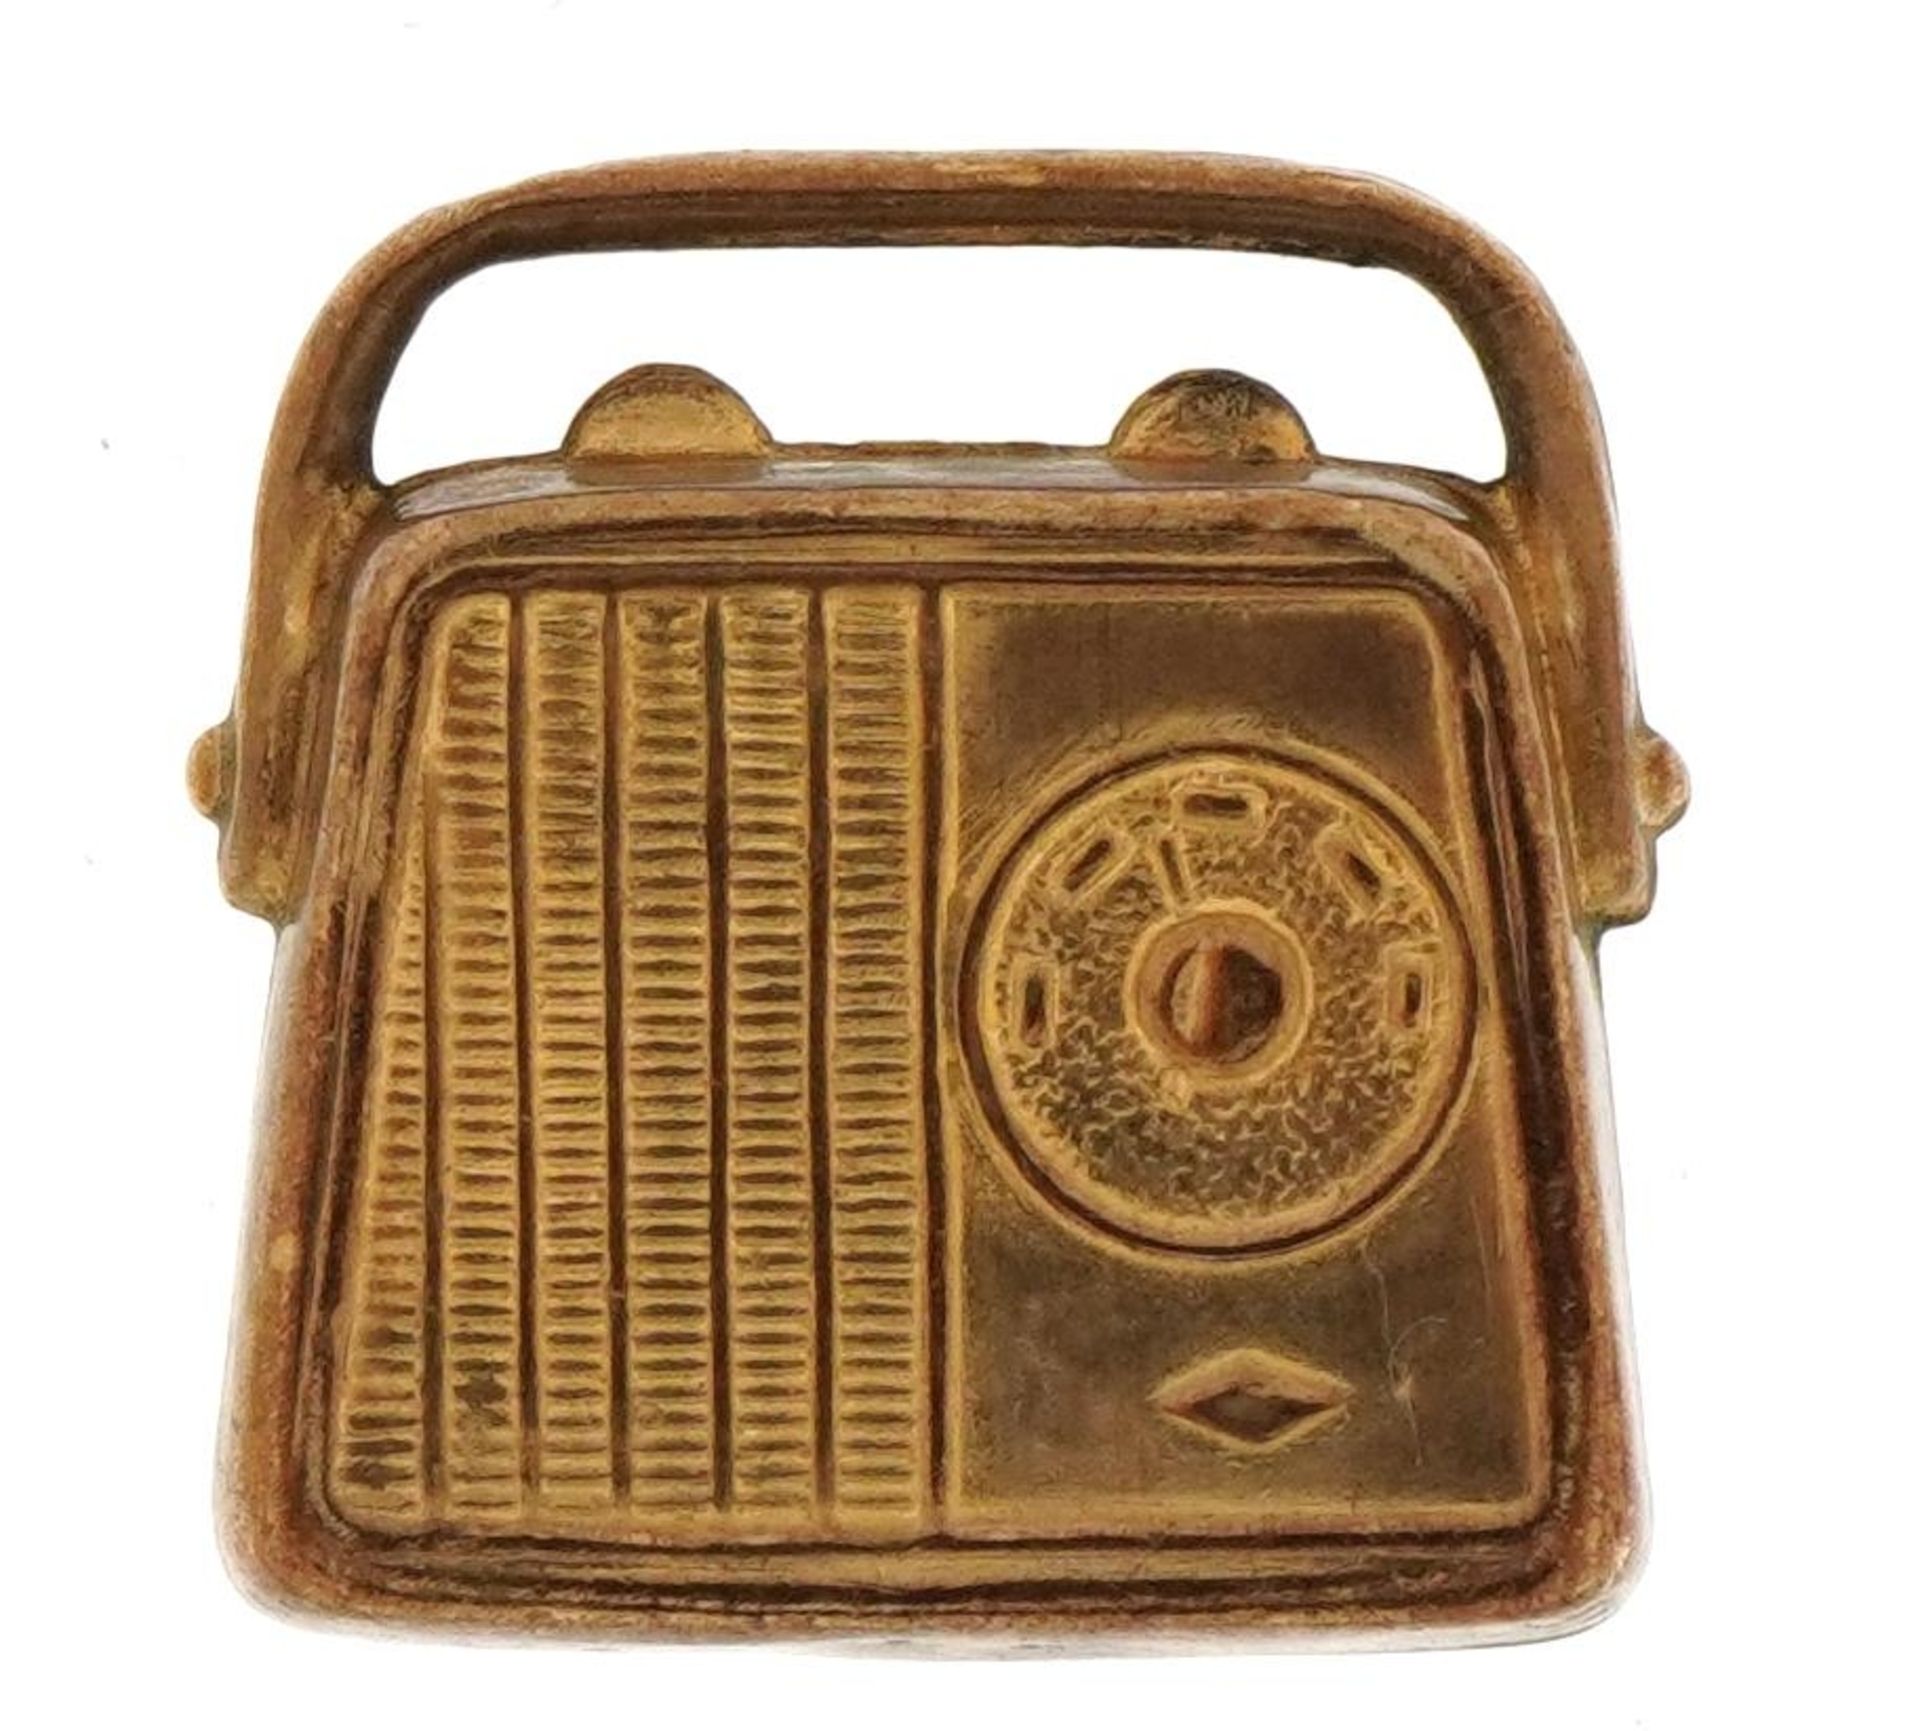 9ct gold vintage radio charm, 1.6cm high, 1.1g : For further information on this lot please